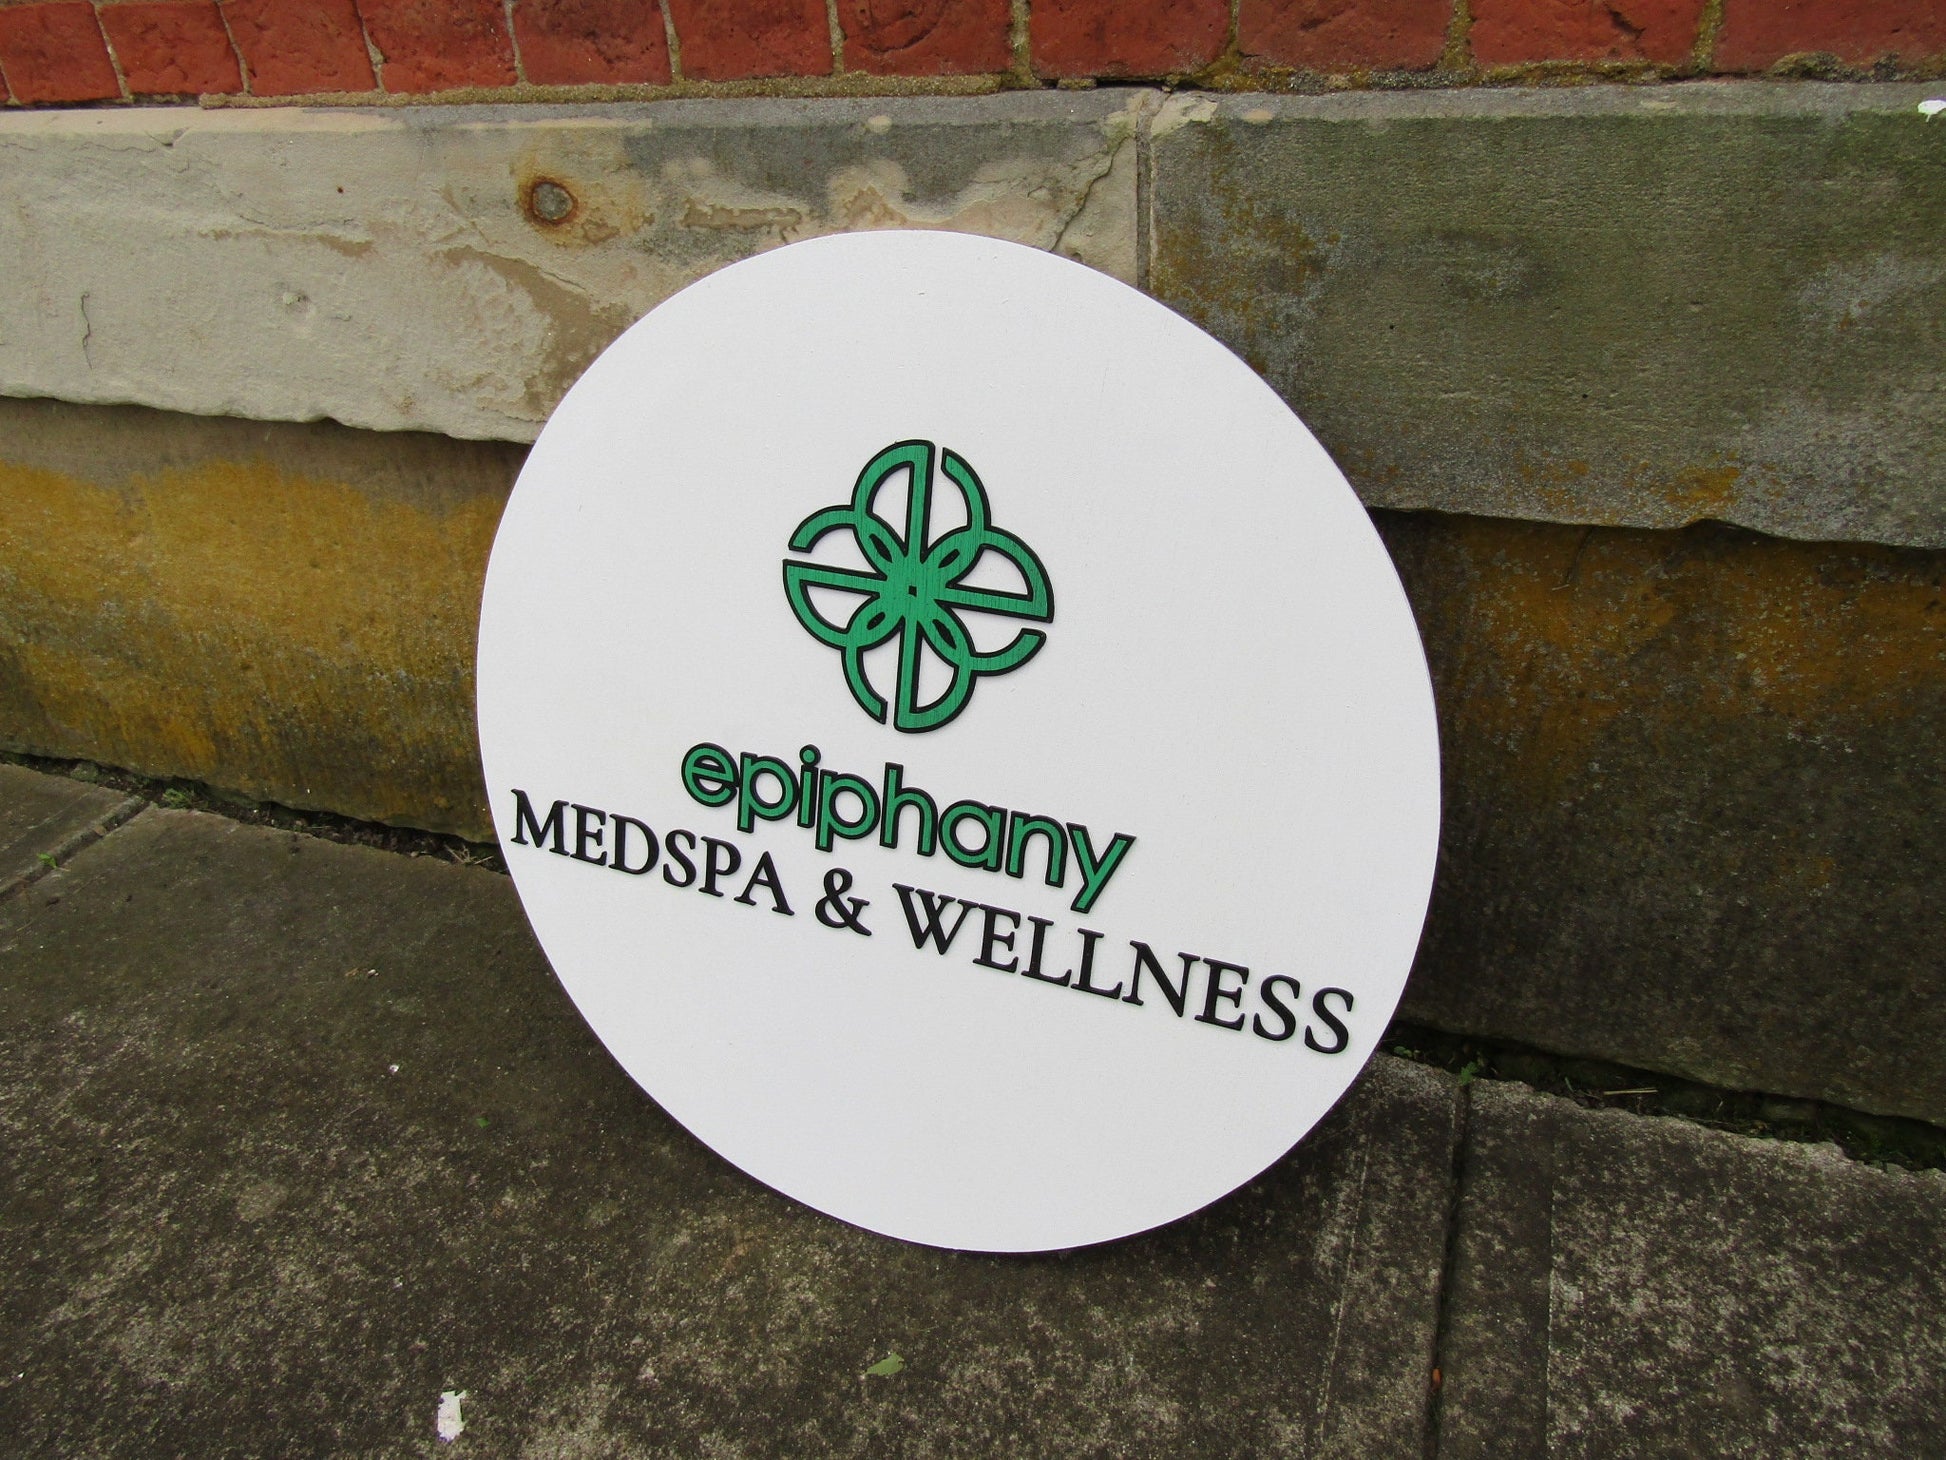 Epiphany Custom Round Business Commerical Signage MedSpa And Wellness Made to Order Store Front Small Shop Logo Circle Wooden Handmade